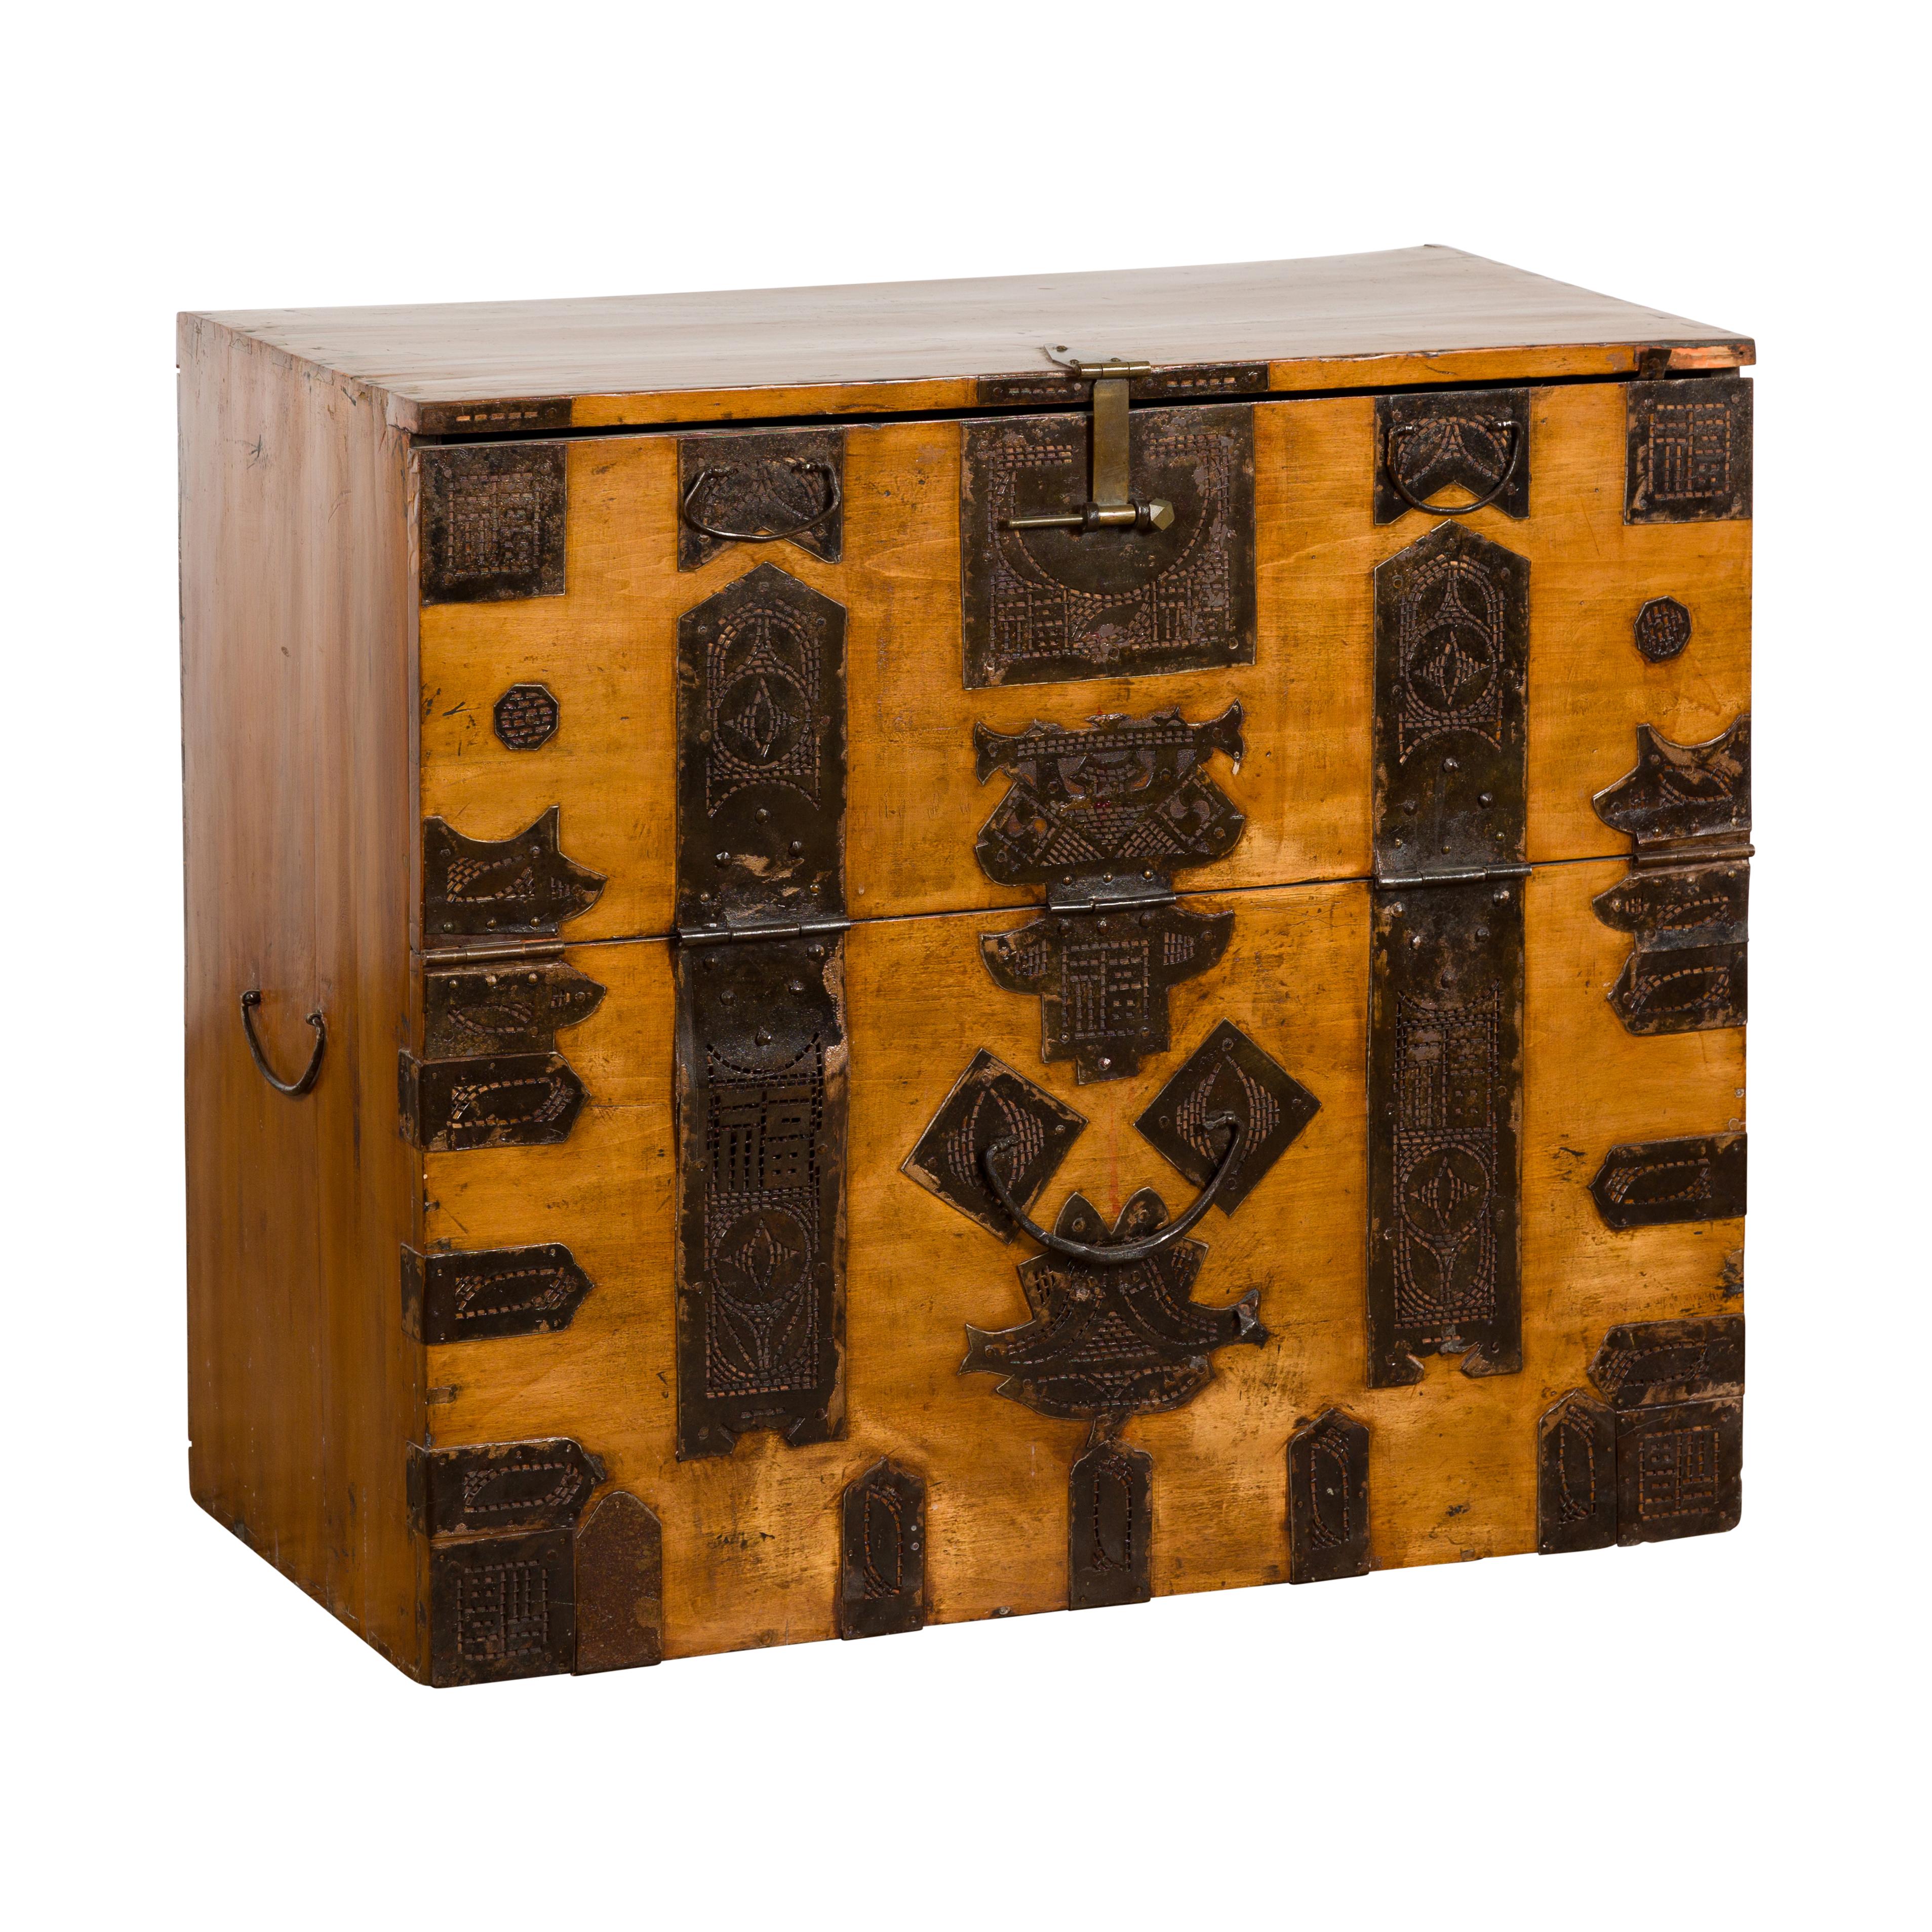 A Korean drop front blanket chest from the 19th century featuring decoration of stylized ornate hardware. Add a touch of traditional Korean charm to your space with this antique 19th-century Korean drop front blanket chest. Crafted from varnished